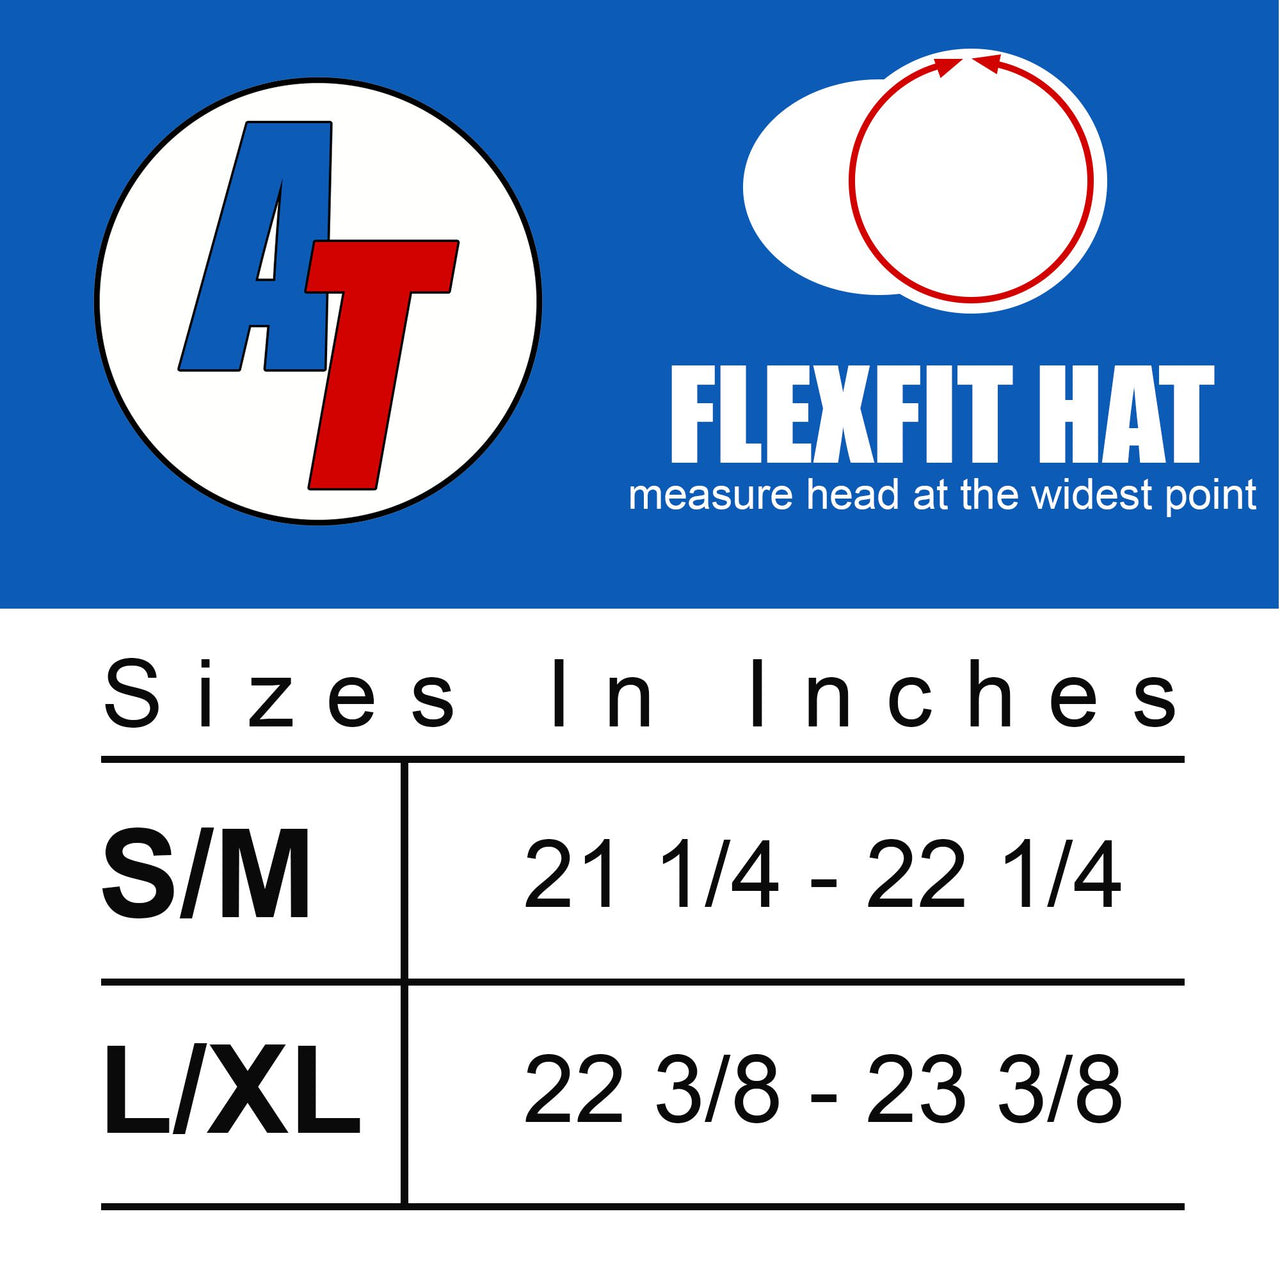 Flexfit hat size chart from aggressive thread